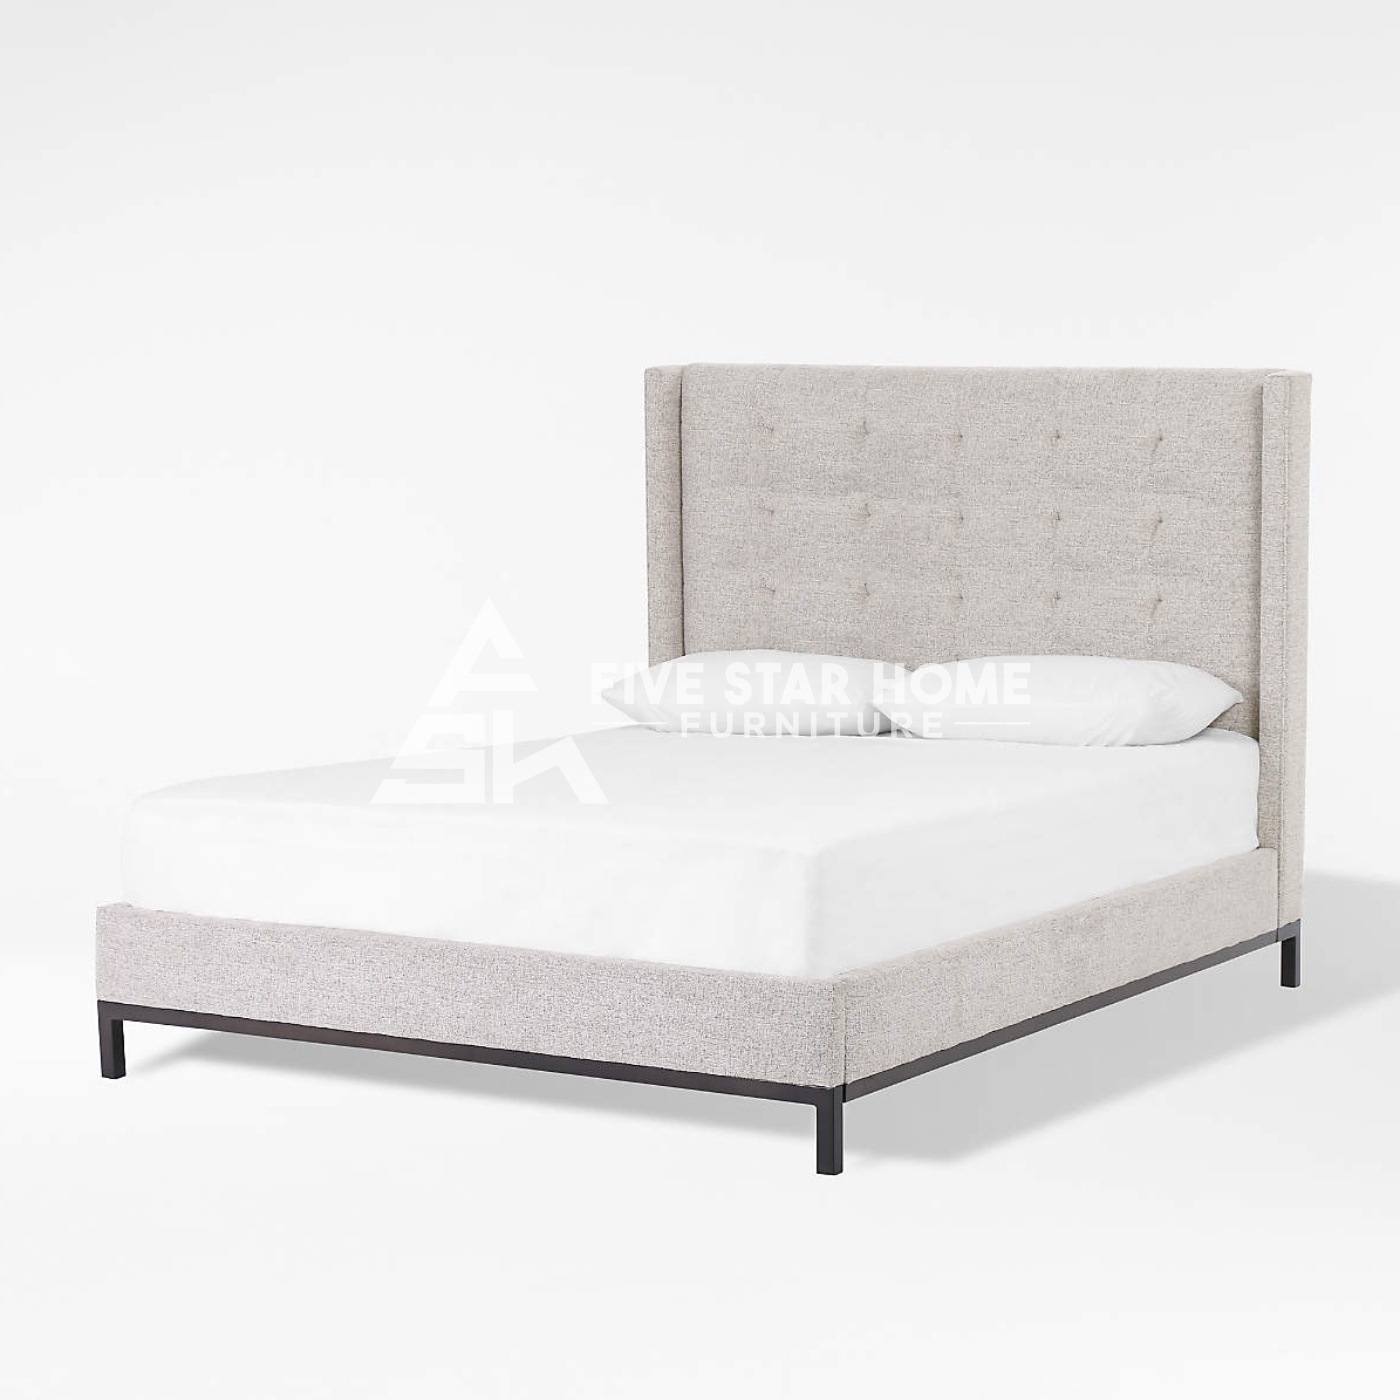 5 Star Maxwell Leather Bed